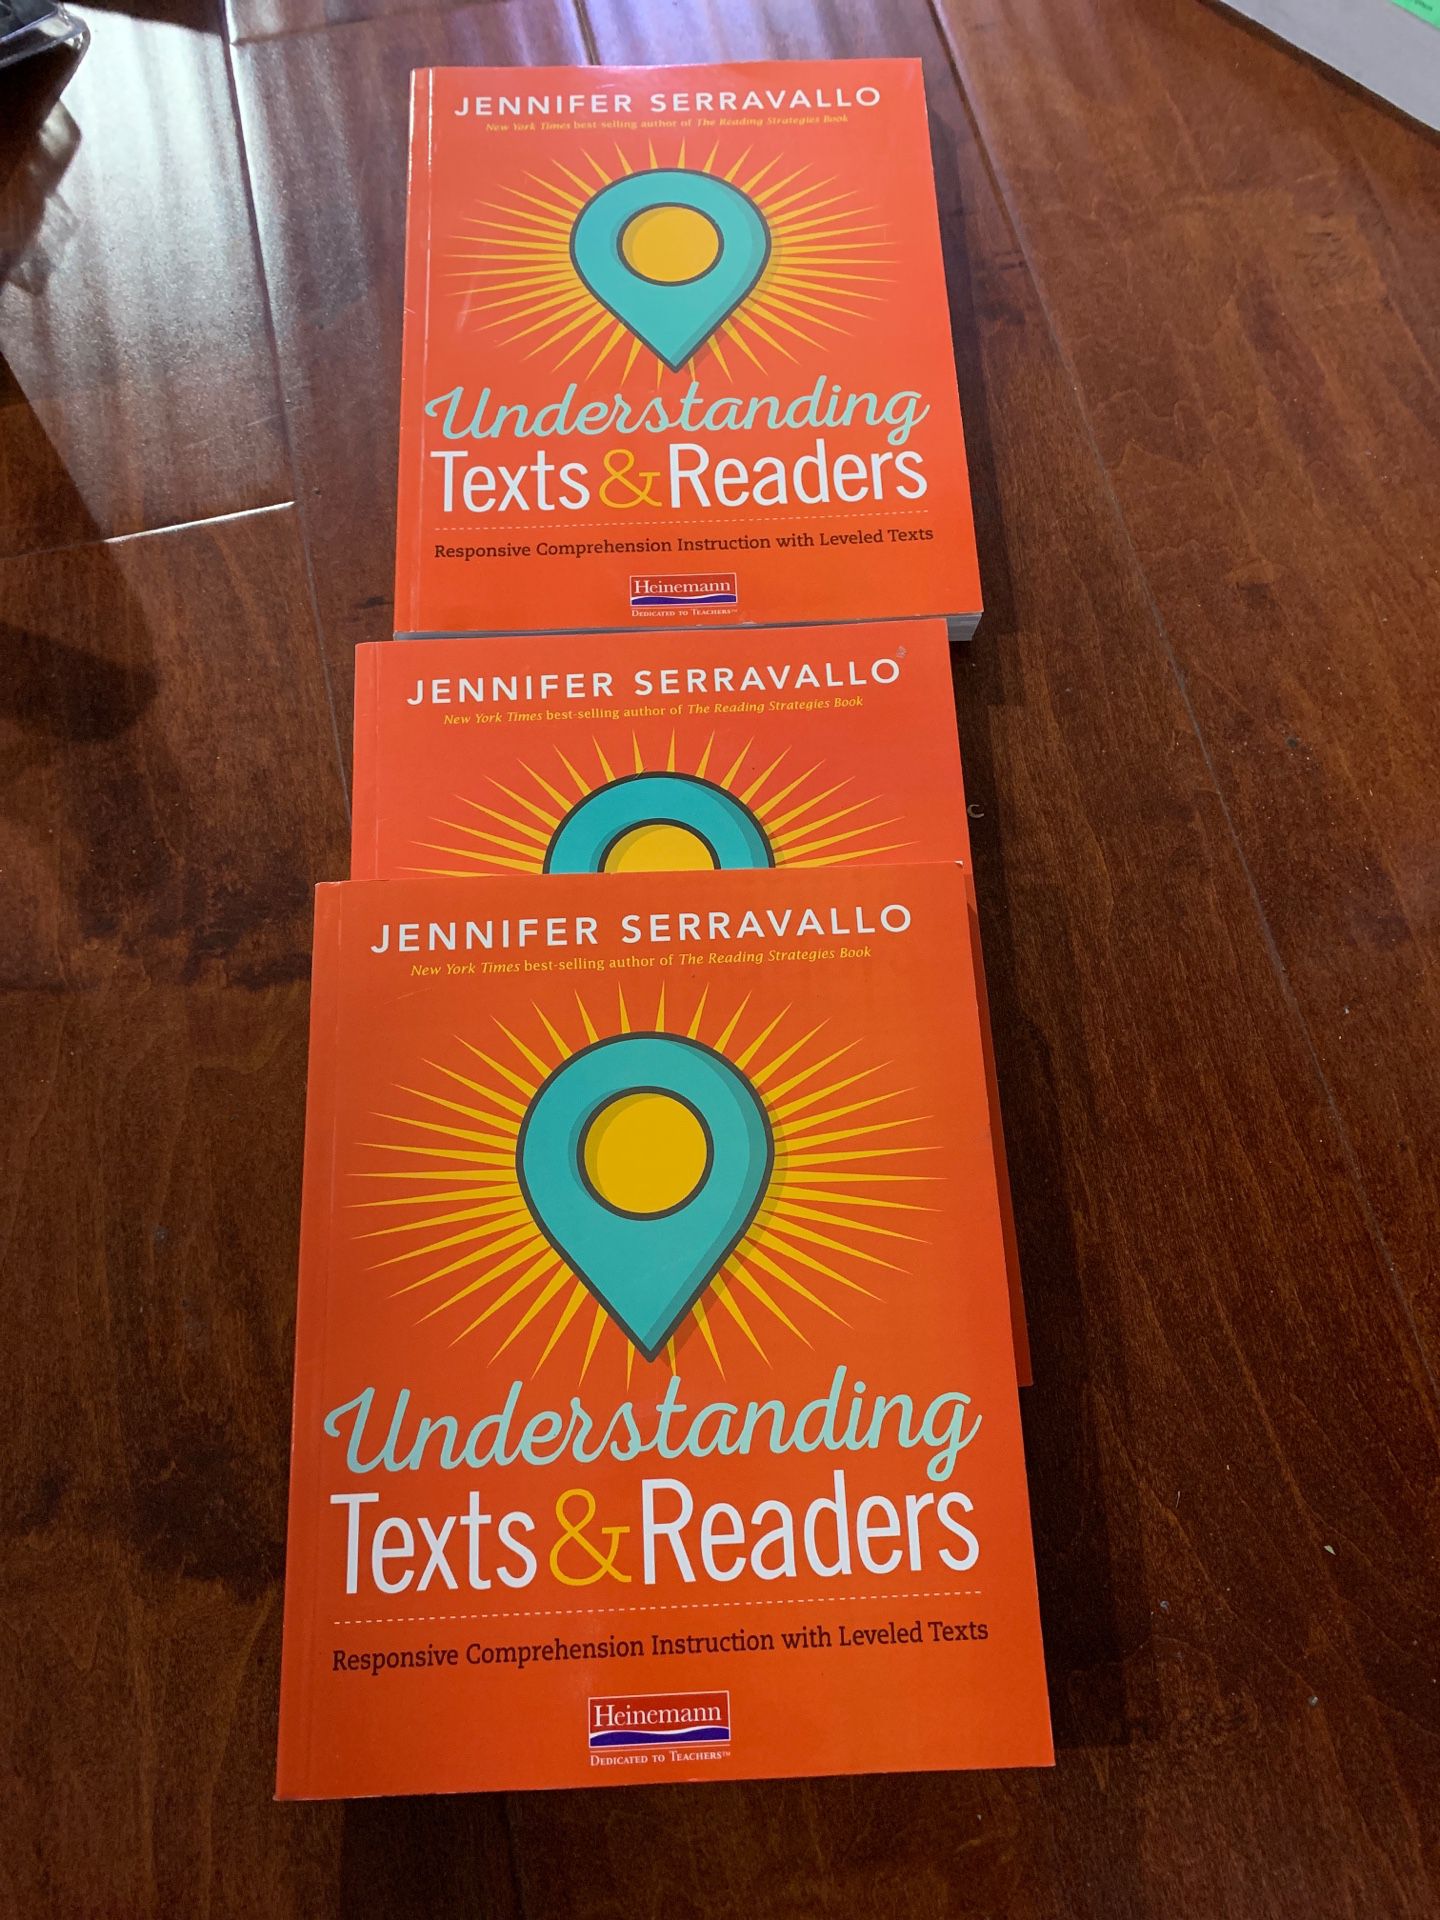 Understanding Texts & Readers: Responsive Comprehension Instruction with Leveled Texts ISBN-13: 978-0325108926, ISBN-10: 0325108927 price for 1